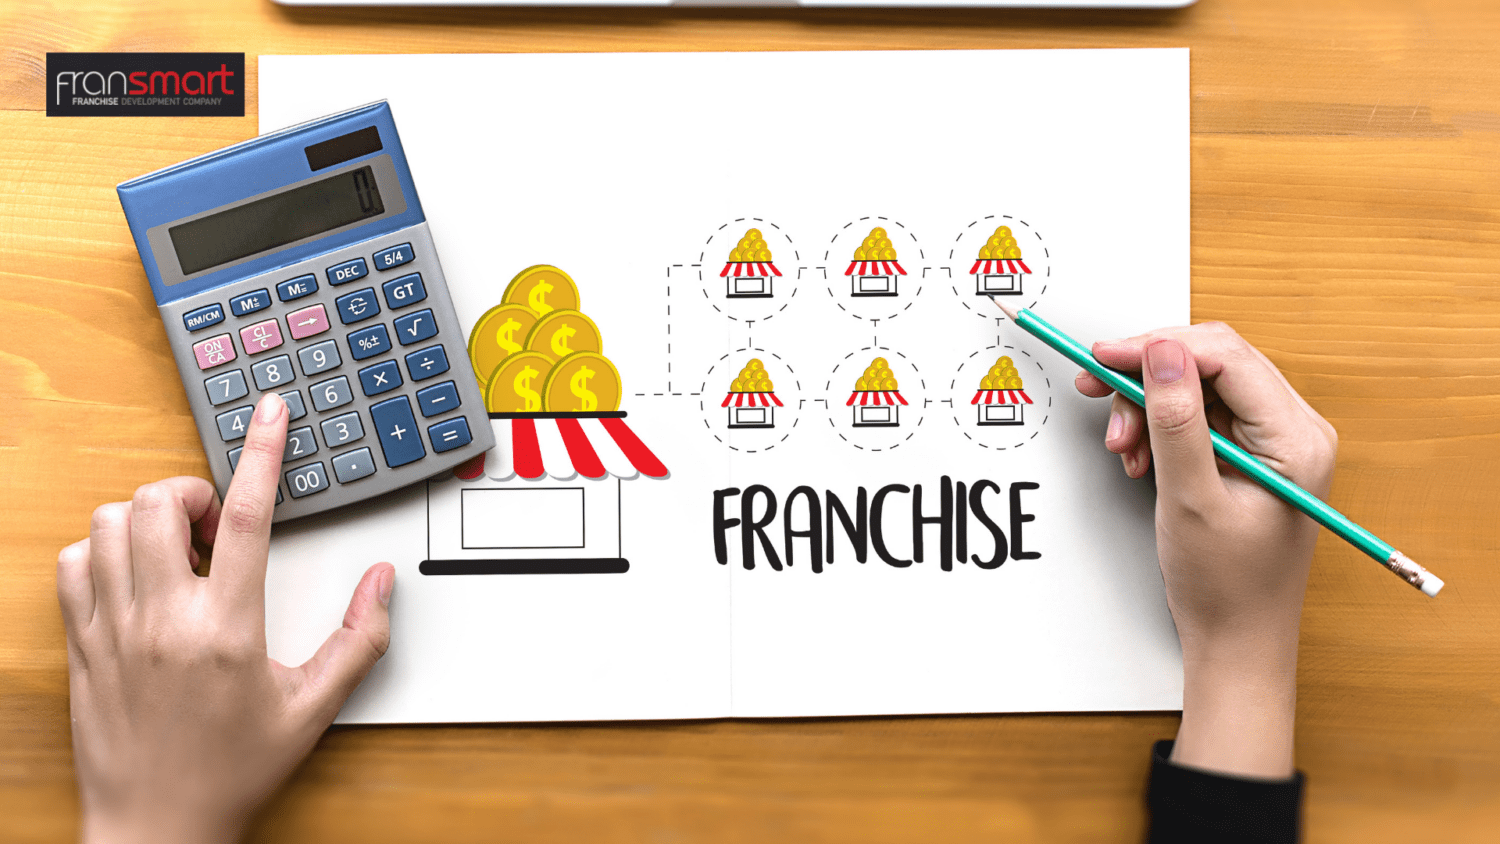 How To Become a Franchise Owner